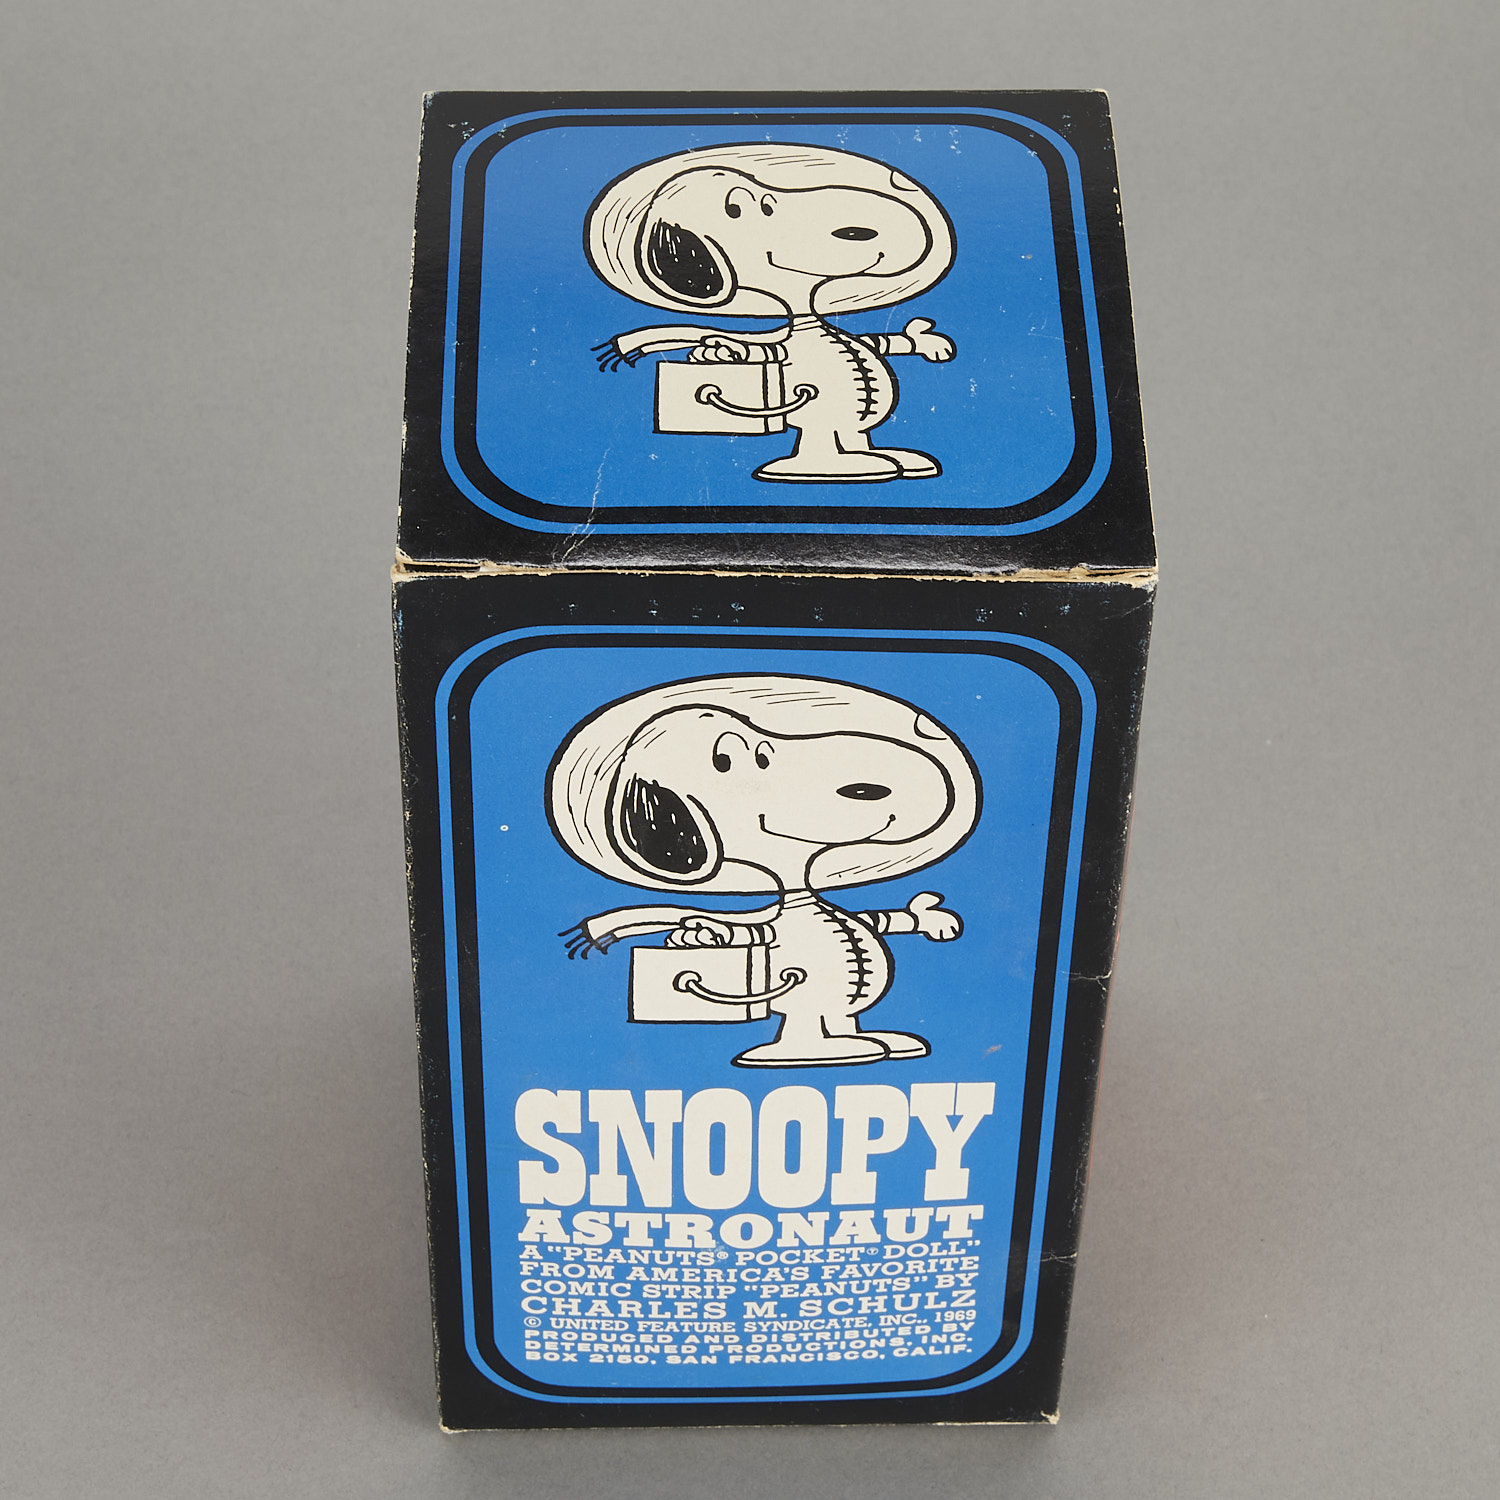 Snoopy Astronaut Pocket Doll with Box - Image 13 of 14